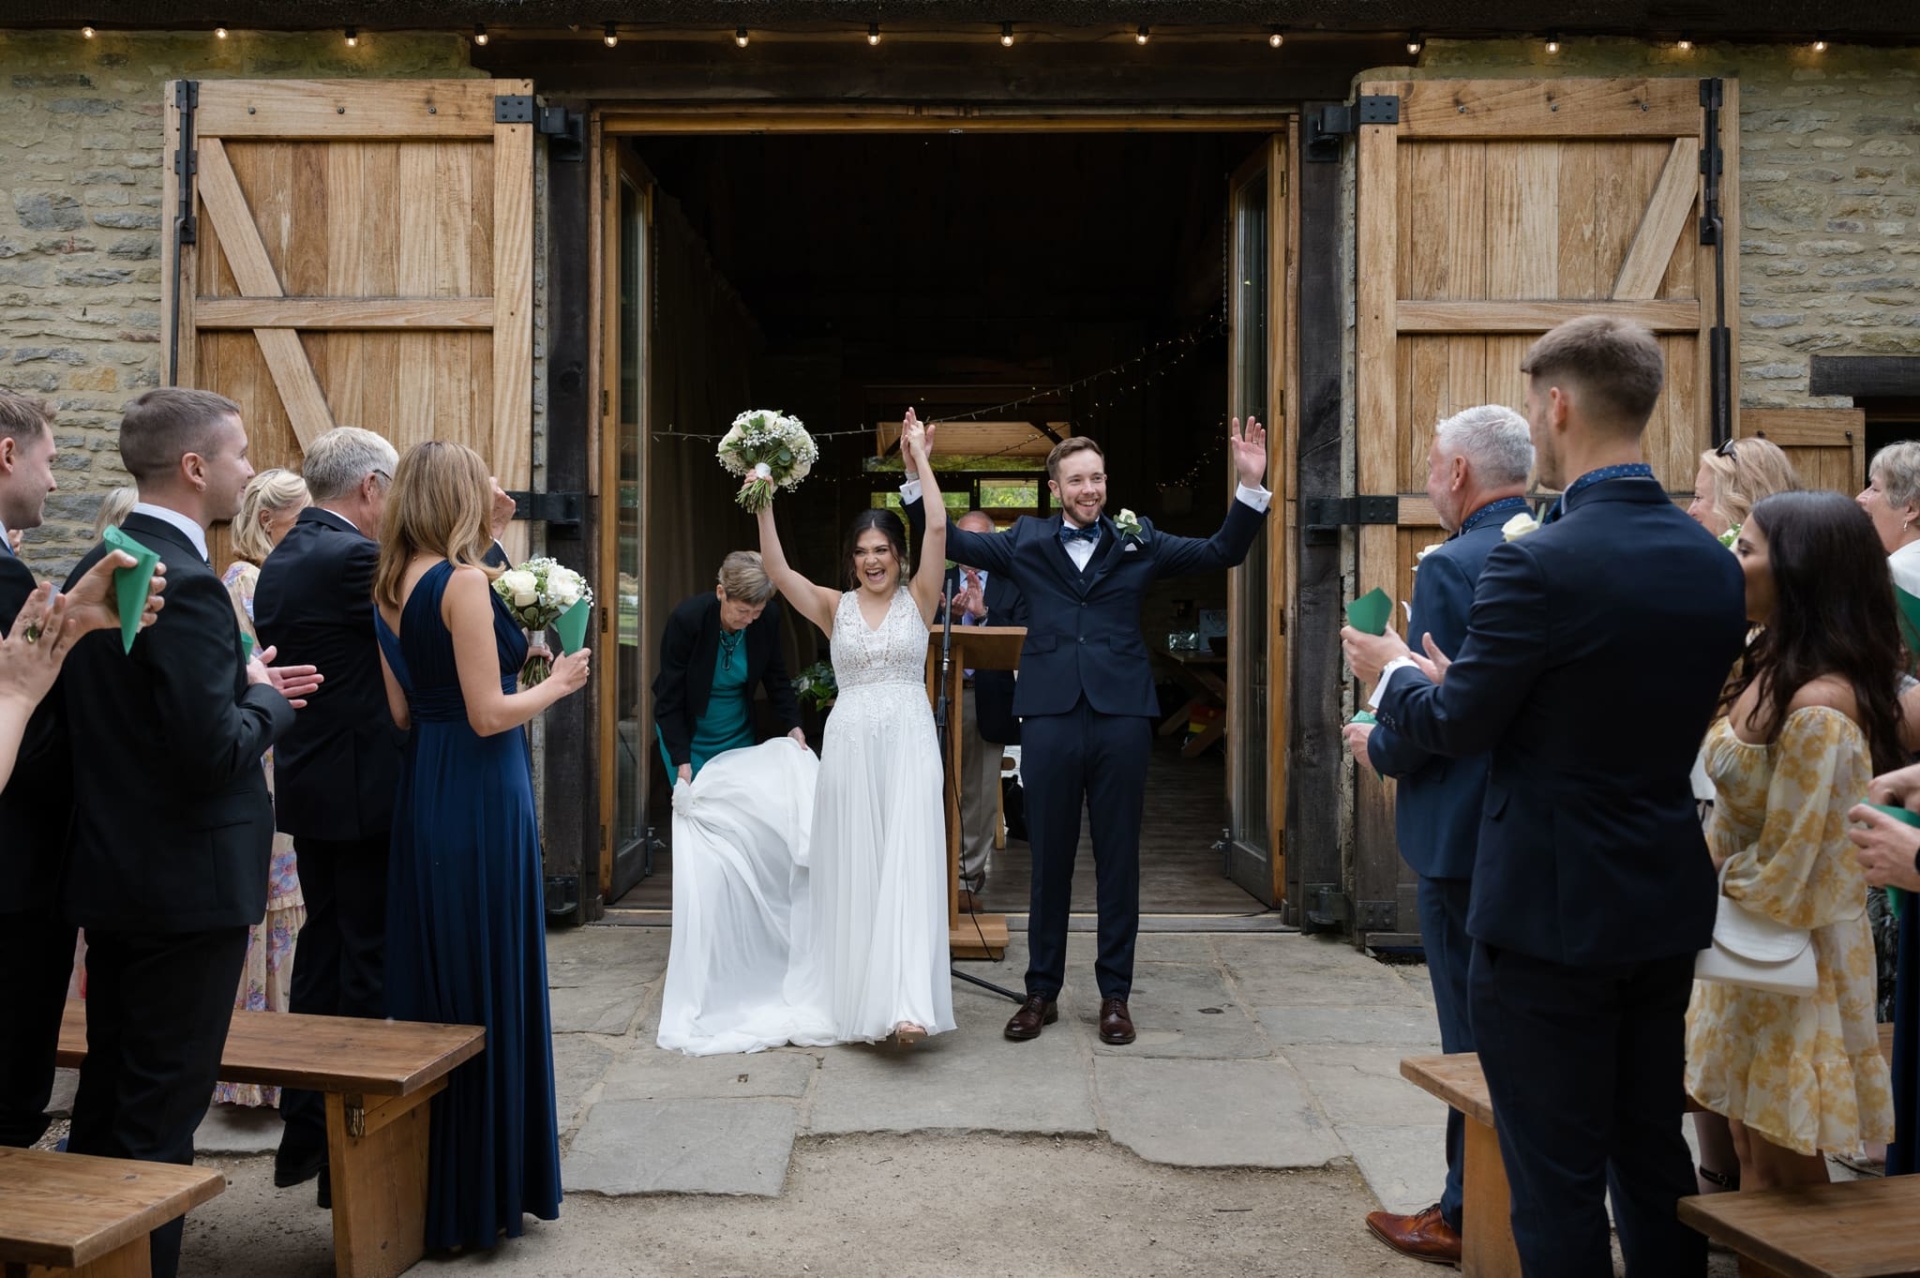 Couple with their arms held high after getting married at The Tythe Barn, Bicester